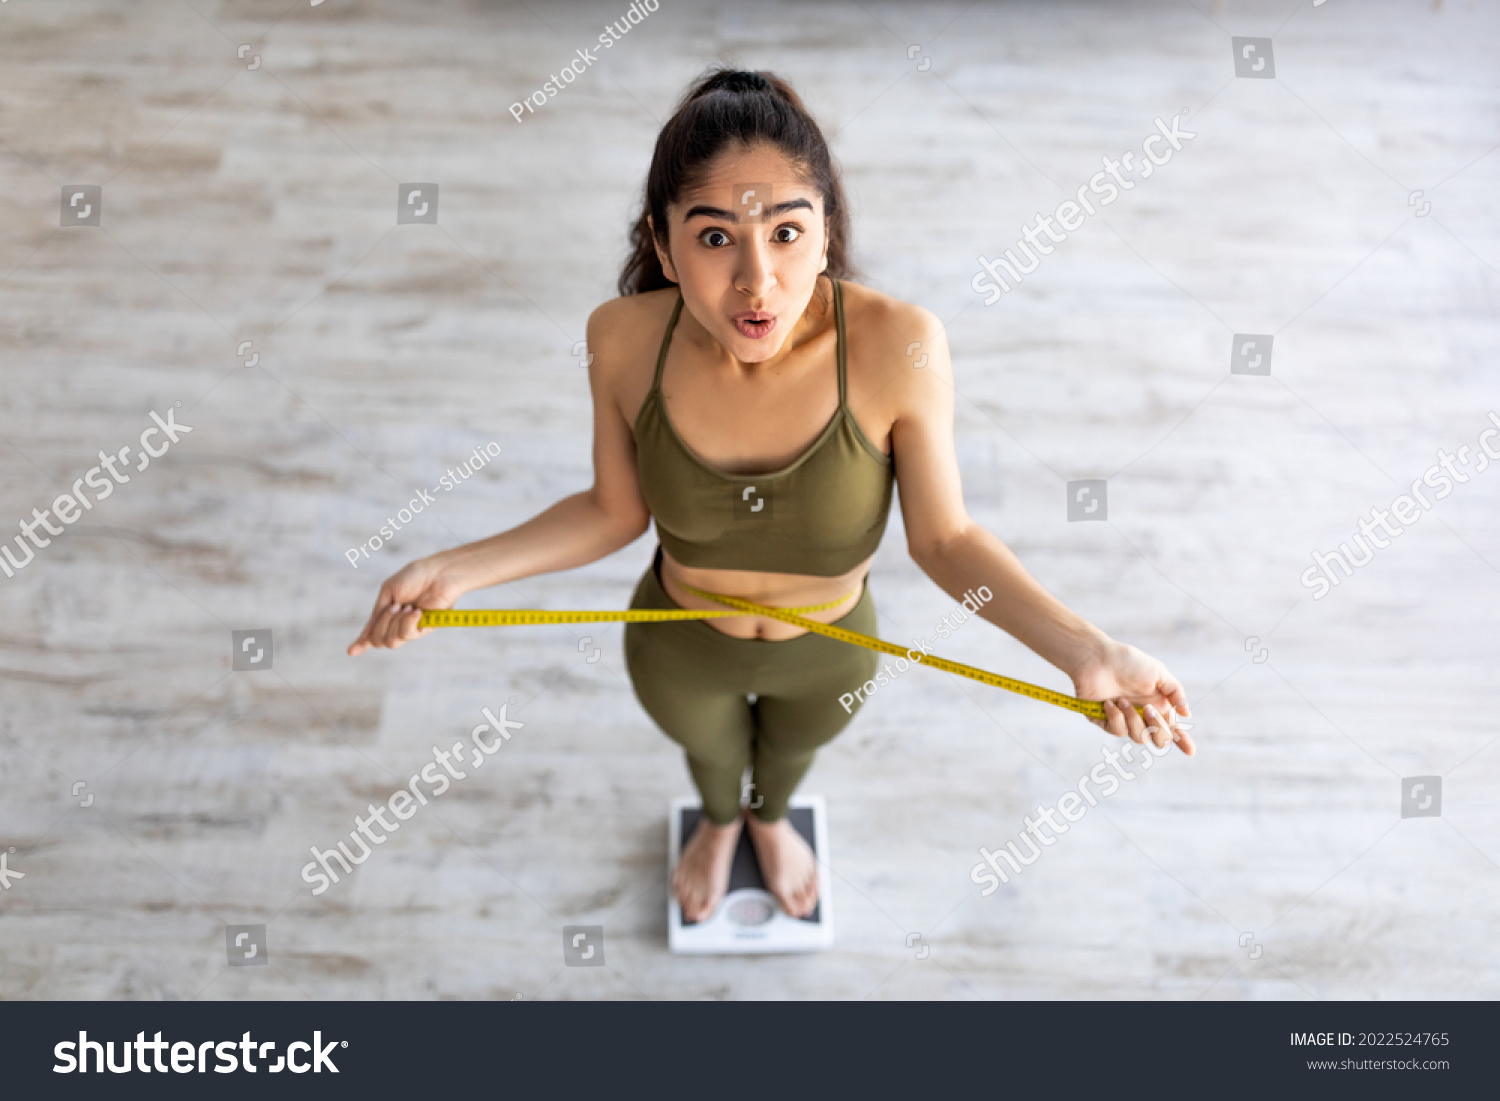 Above view of shocked Indian lady standing on scales, checking her waist measurements, surprised with unexpected results of weight loss program, indoors. Slimming diet and workout concept #2022524765